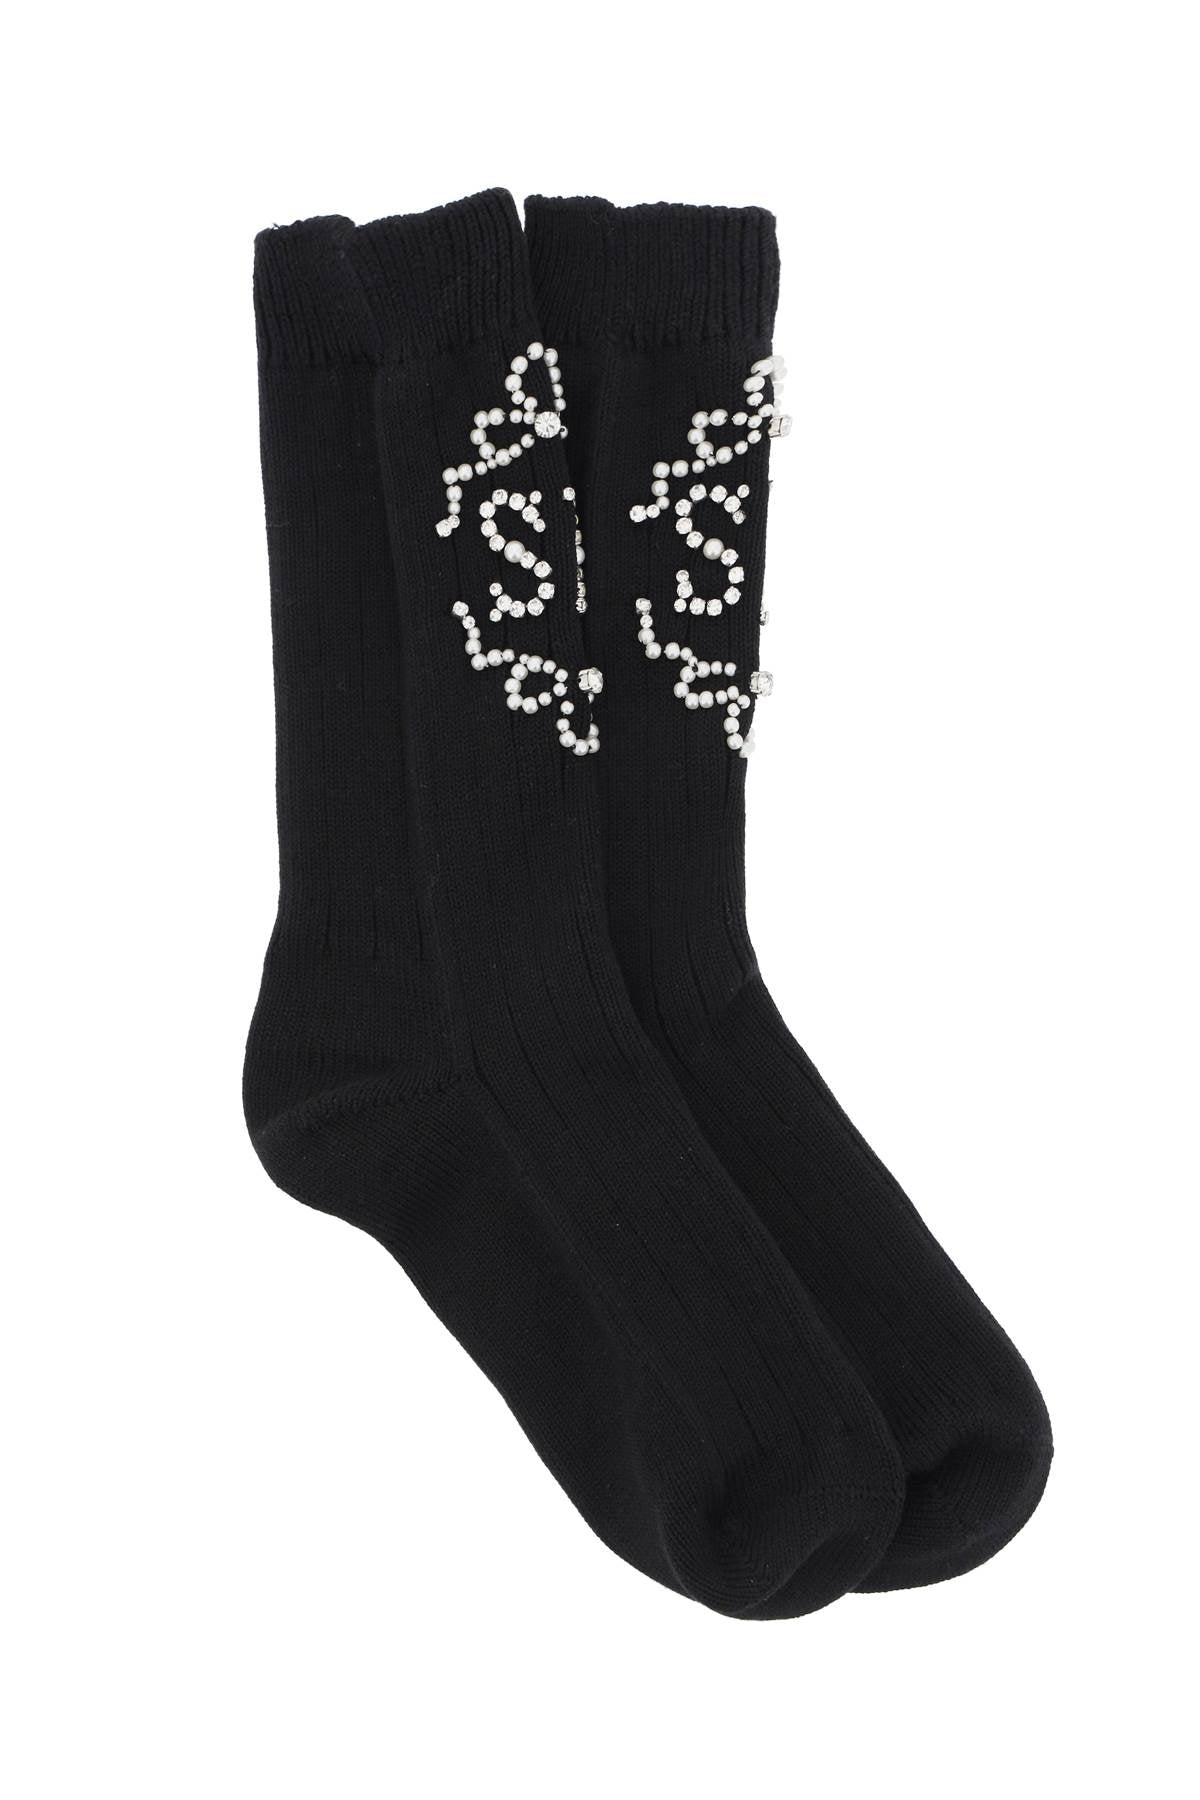 Simone Rocha Sr Socks With Pearls And Crystals Women